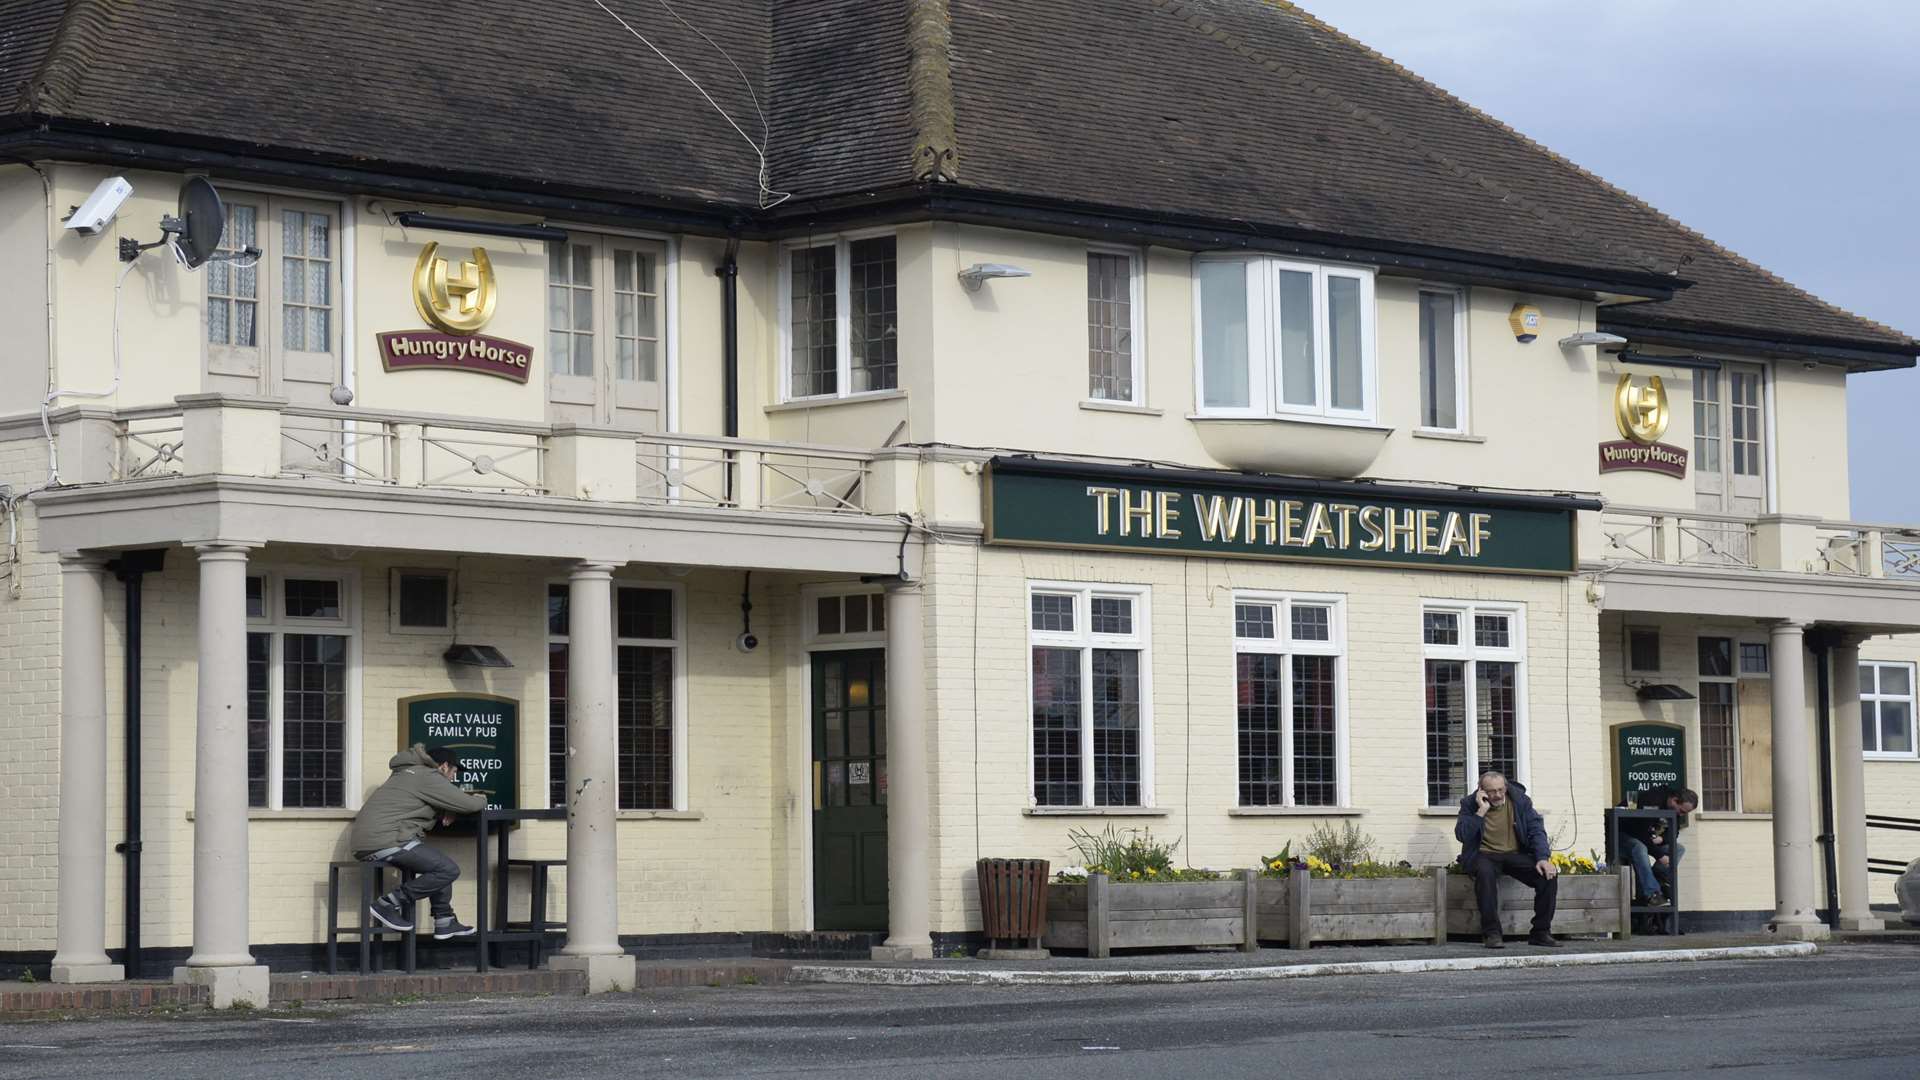 Baillie stole money from the Wheatsheaf pub in Herne Bay Road, Whitstable